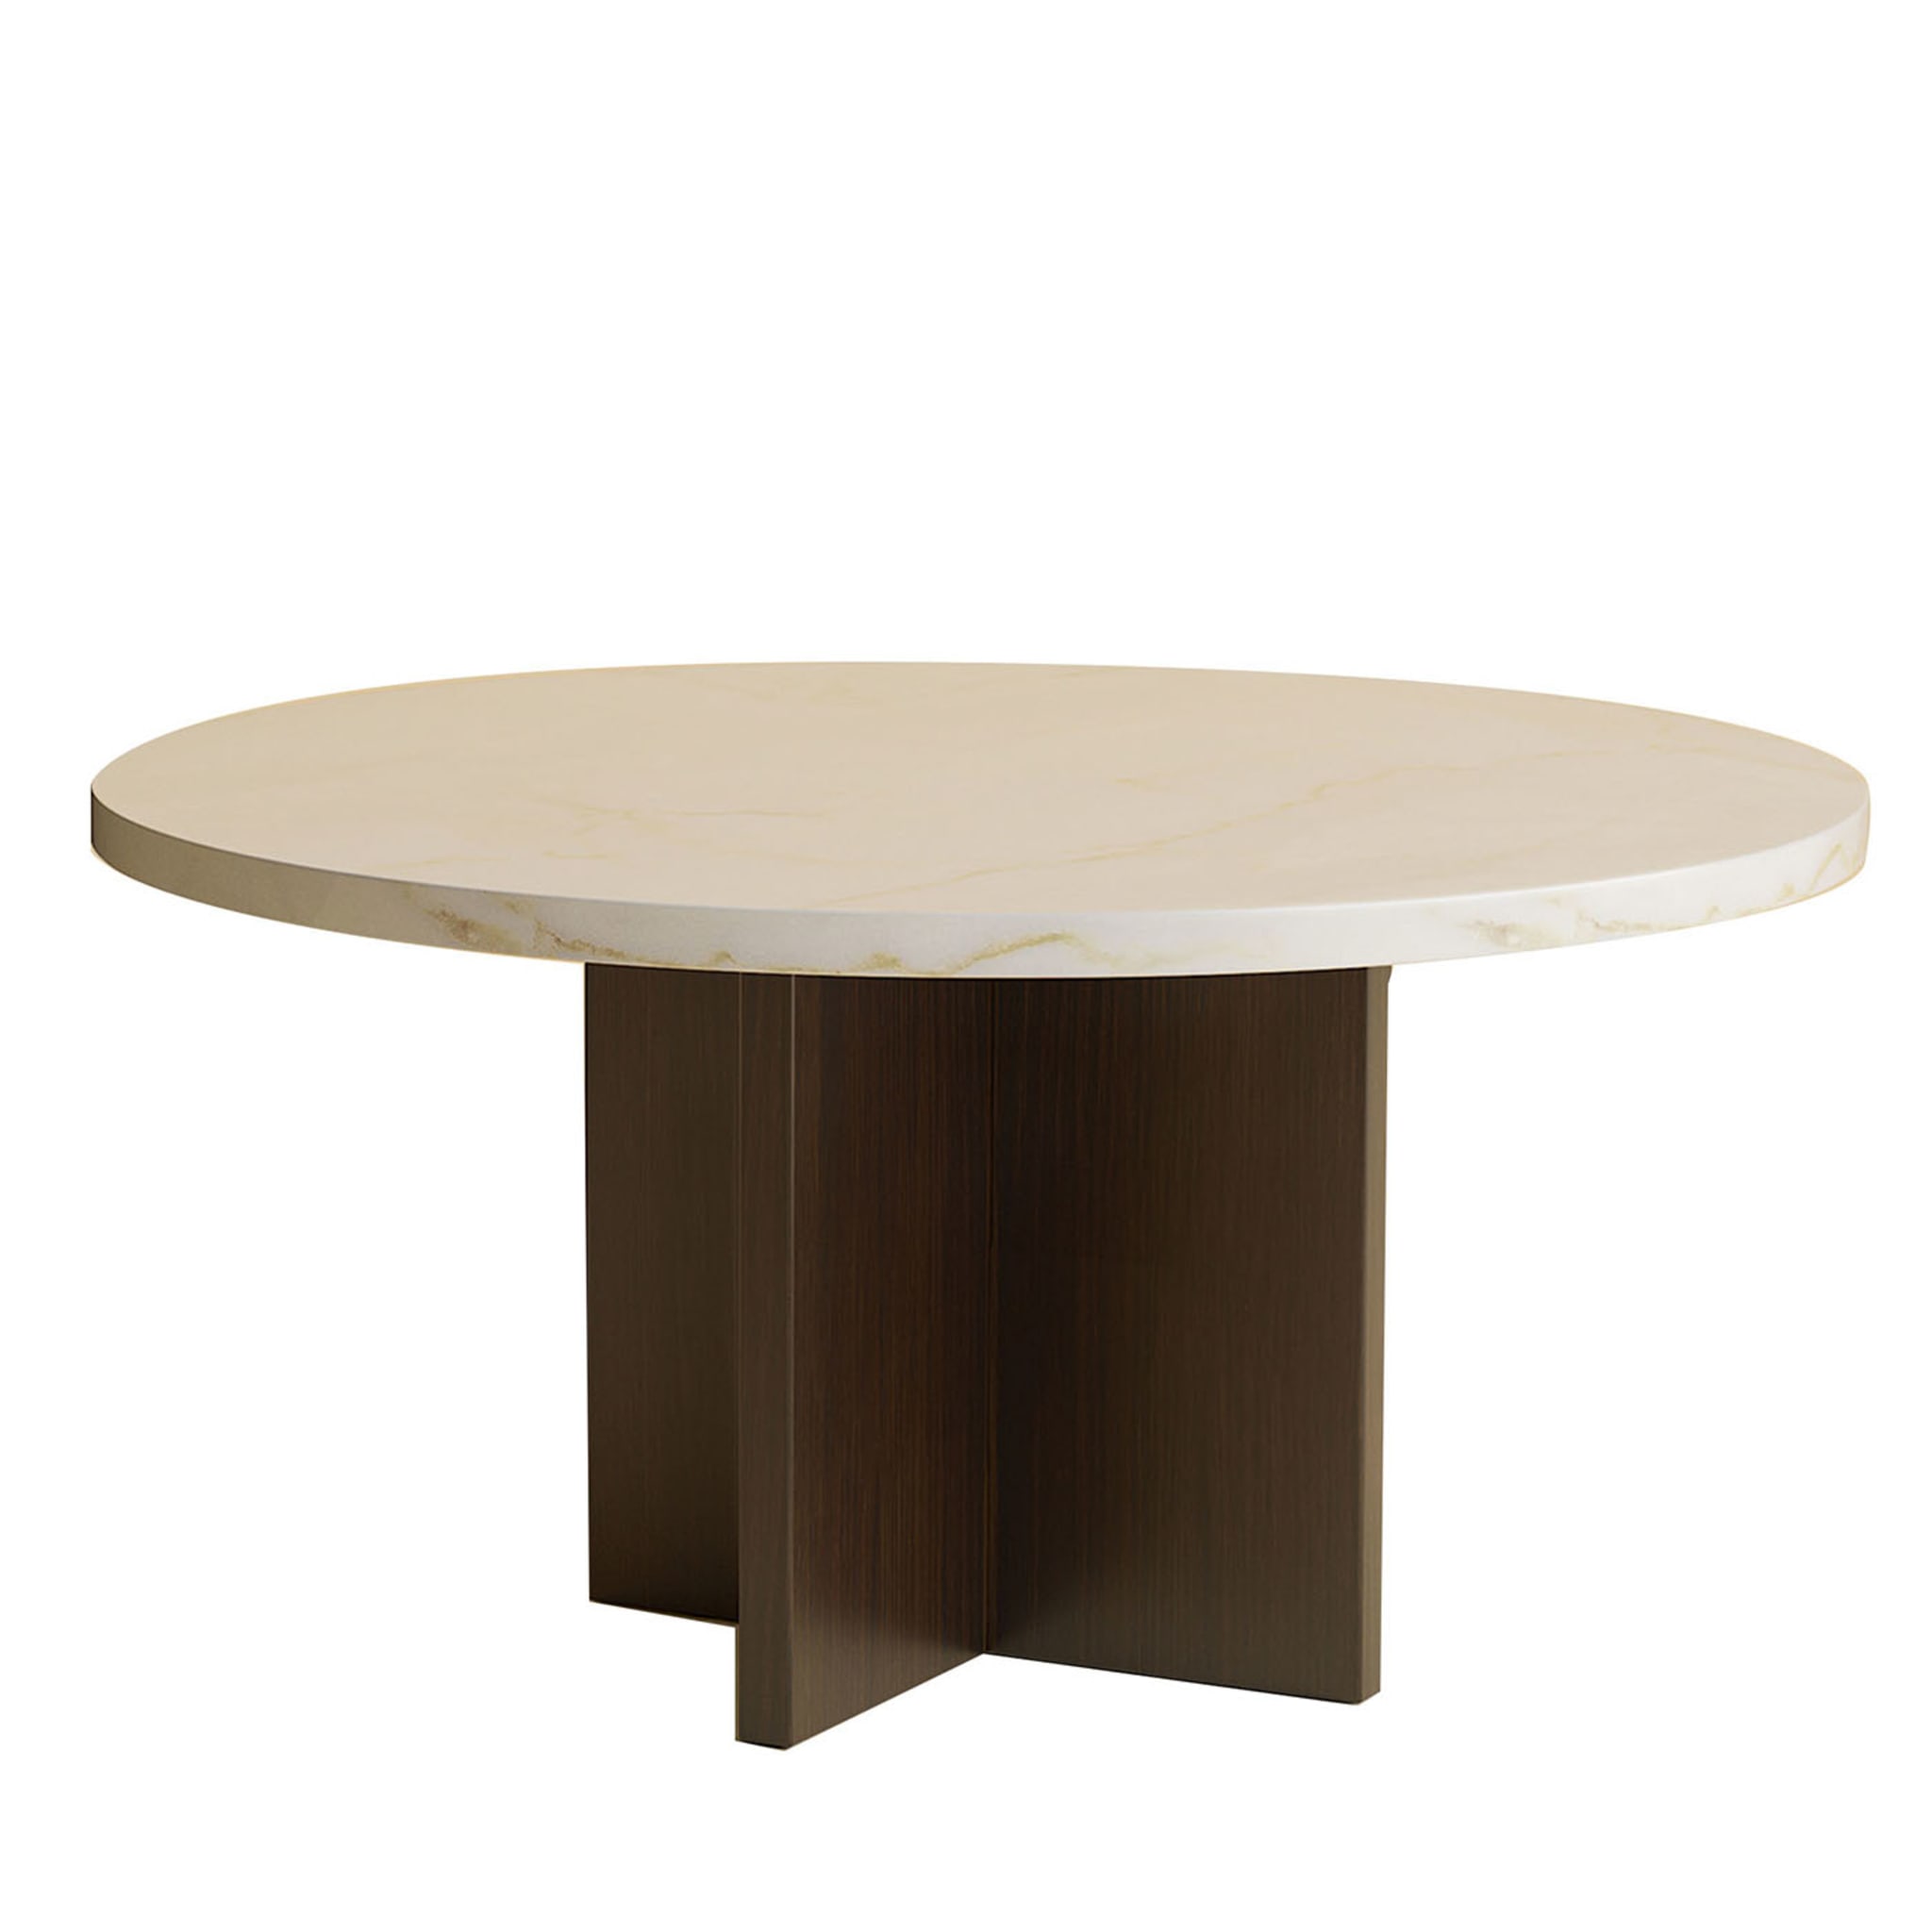 Tinian Calacatta Gold and Durmast Coffee Table - Main view